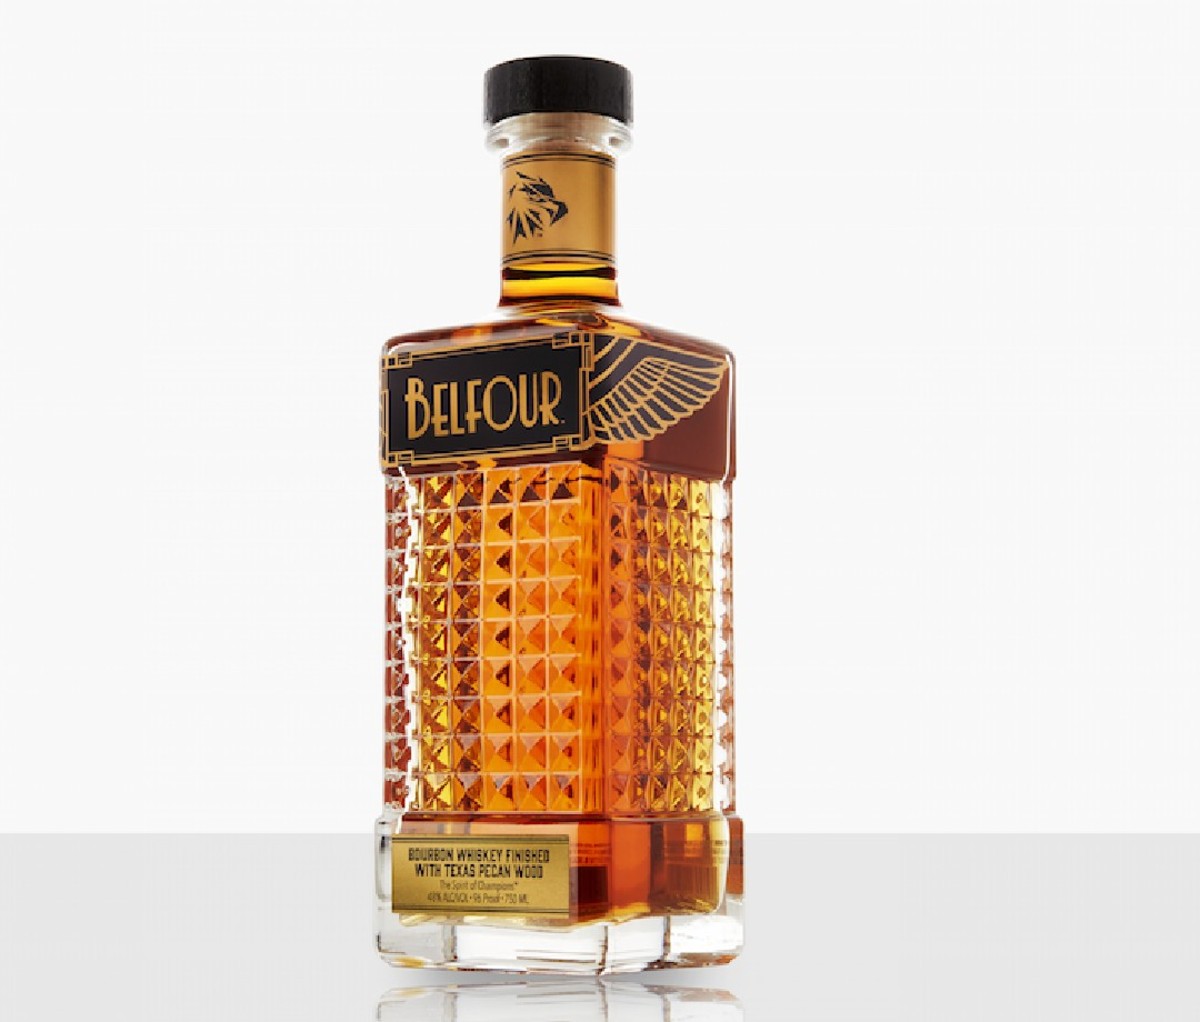 Square bottle of Belfour Spirits Pecan-Finished Bourbon on a gray surface